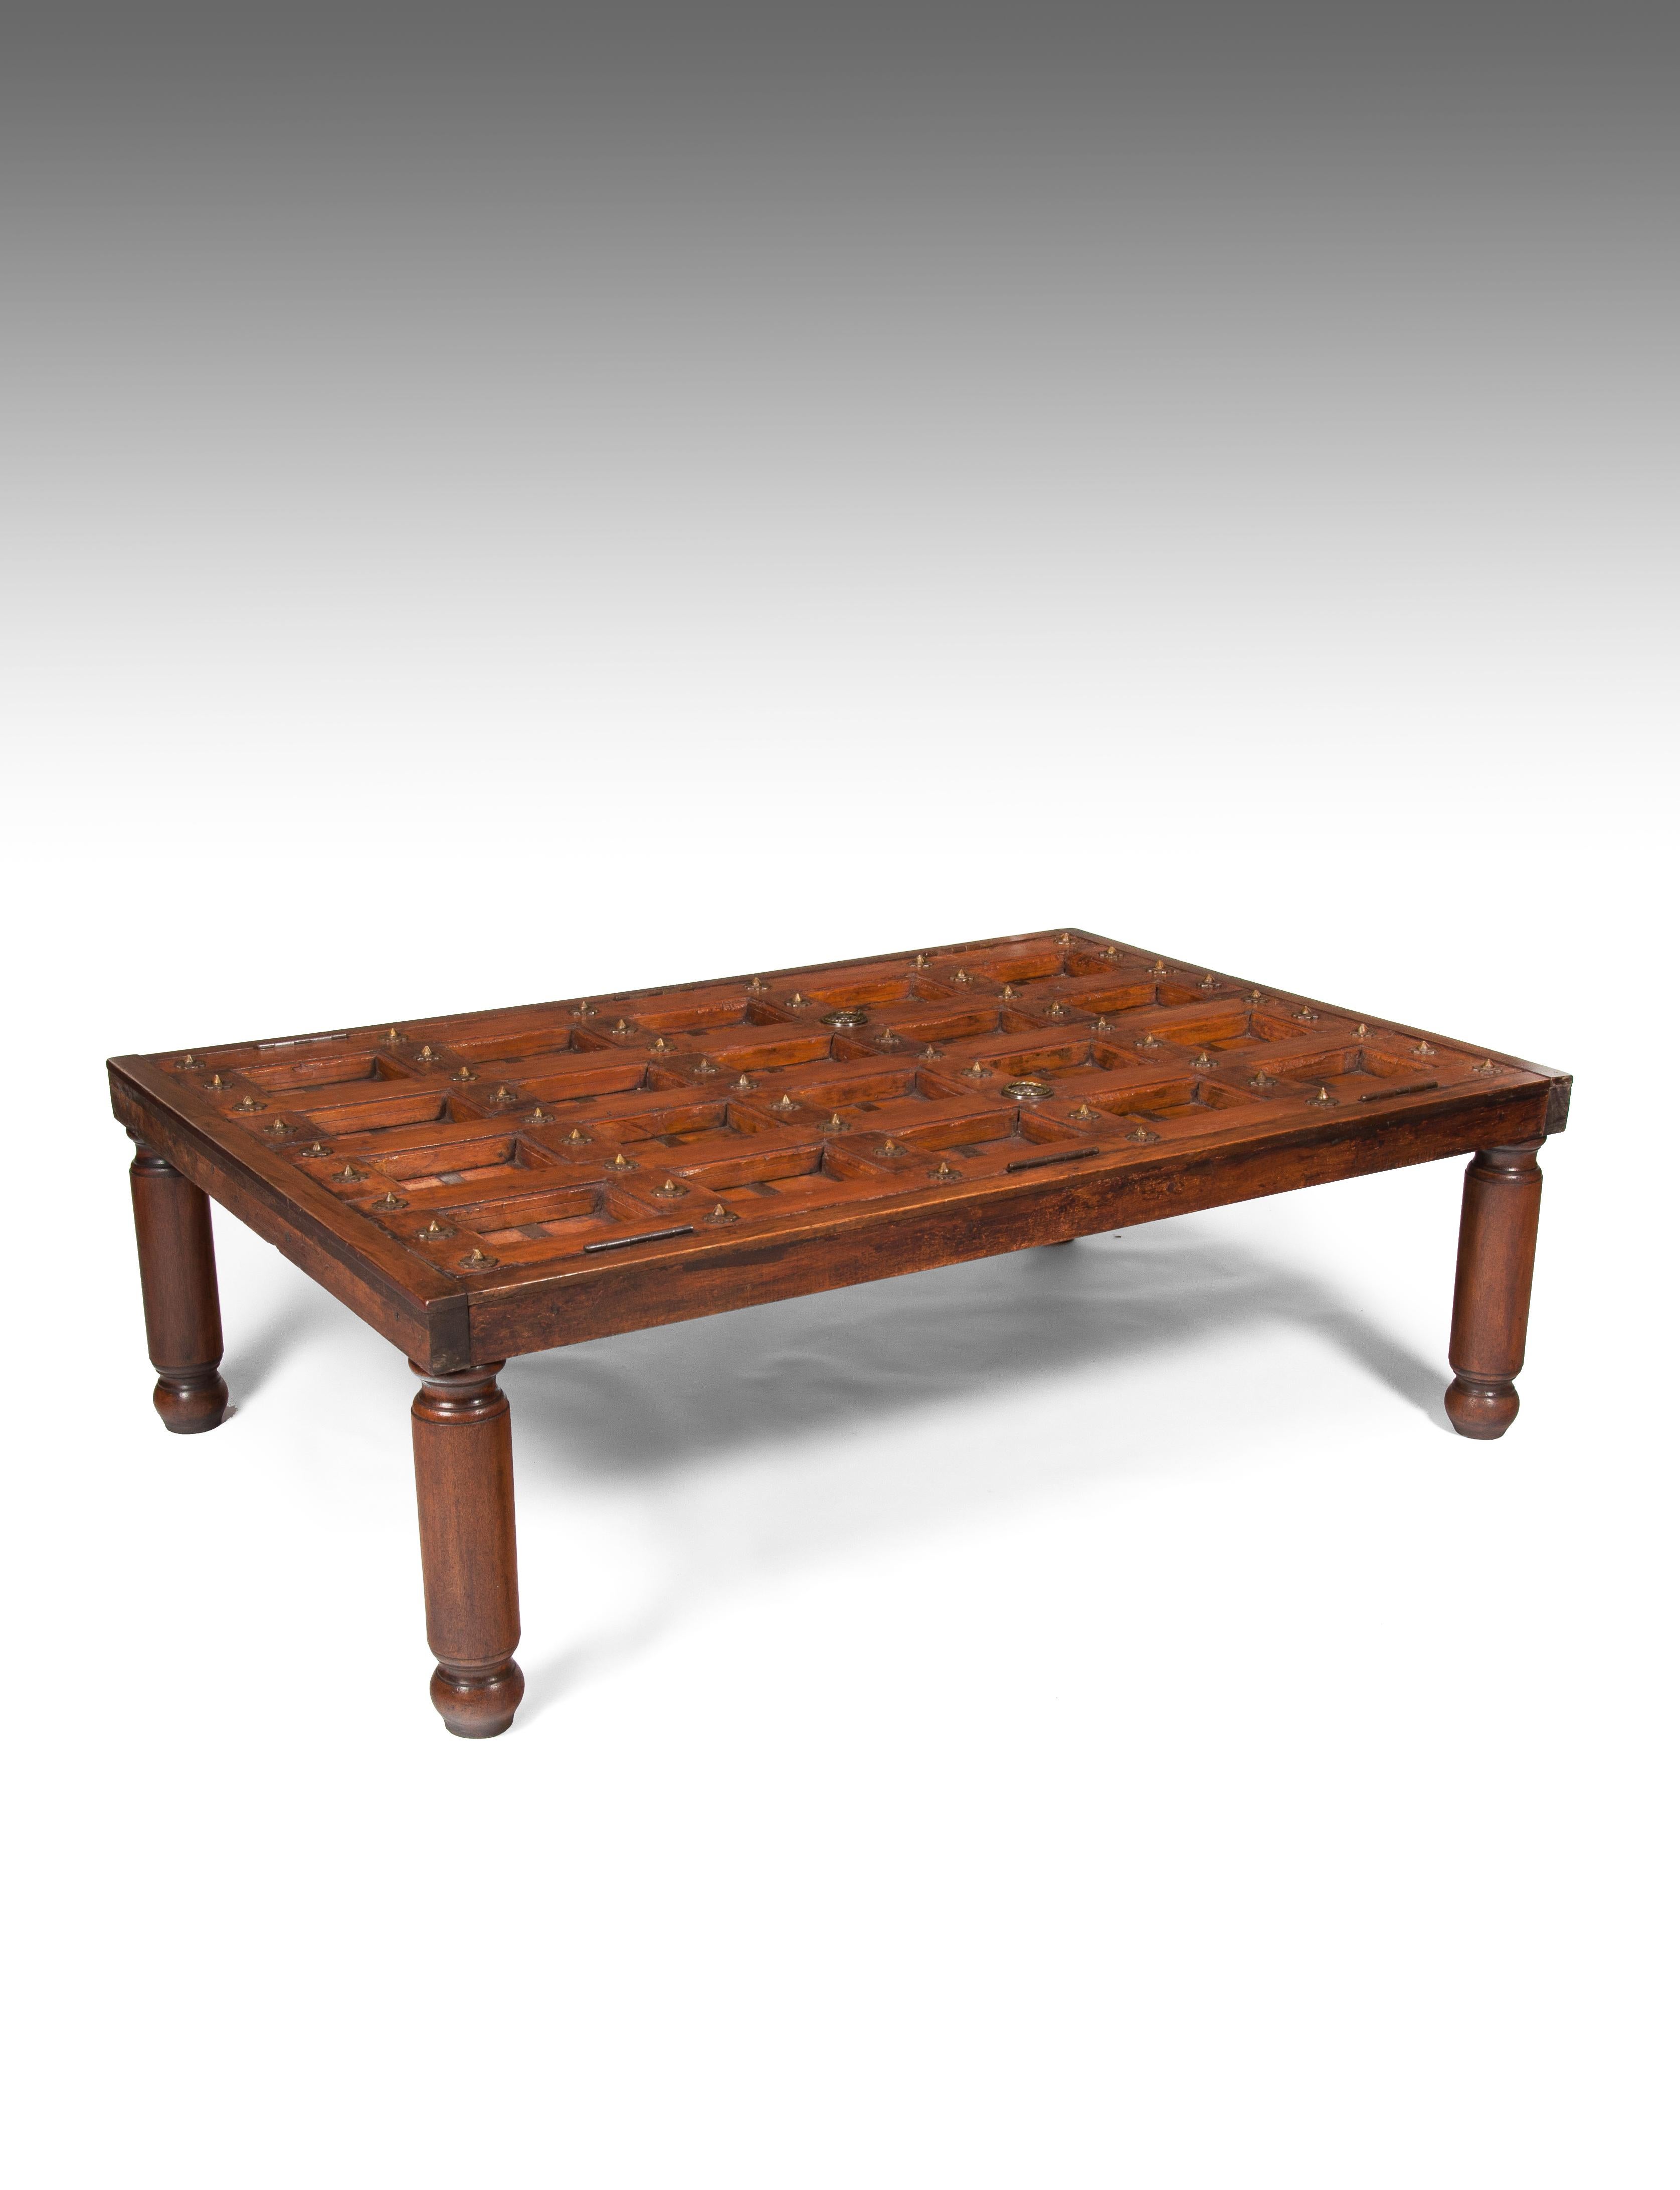 A superb early 19th century teak Indian entrance door converted into a coffee table.

Indian, circa 1820-1830.

Having a wonderful patina and coloring this entrance door would have been the front doors to an Indian fortress.
Made from solid